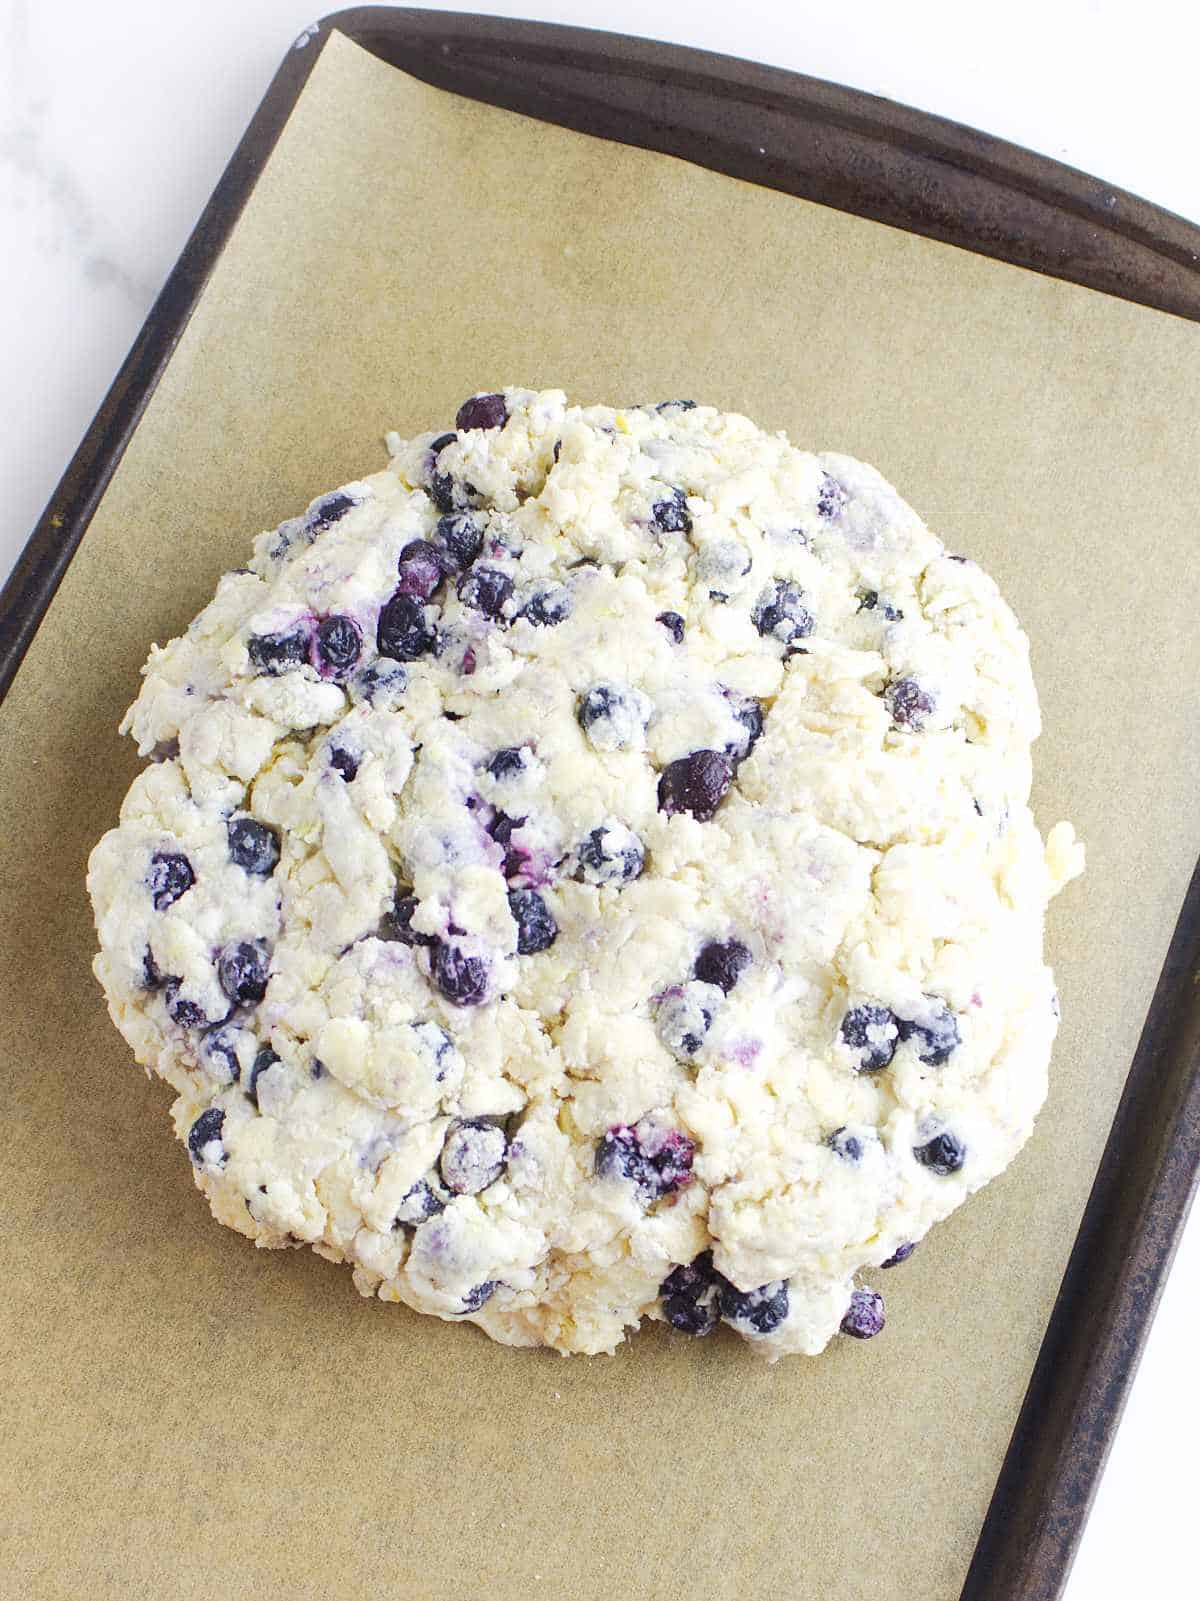 blueberry dough disc on a parchment paper lined baking sheet.